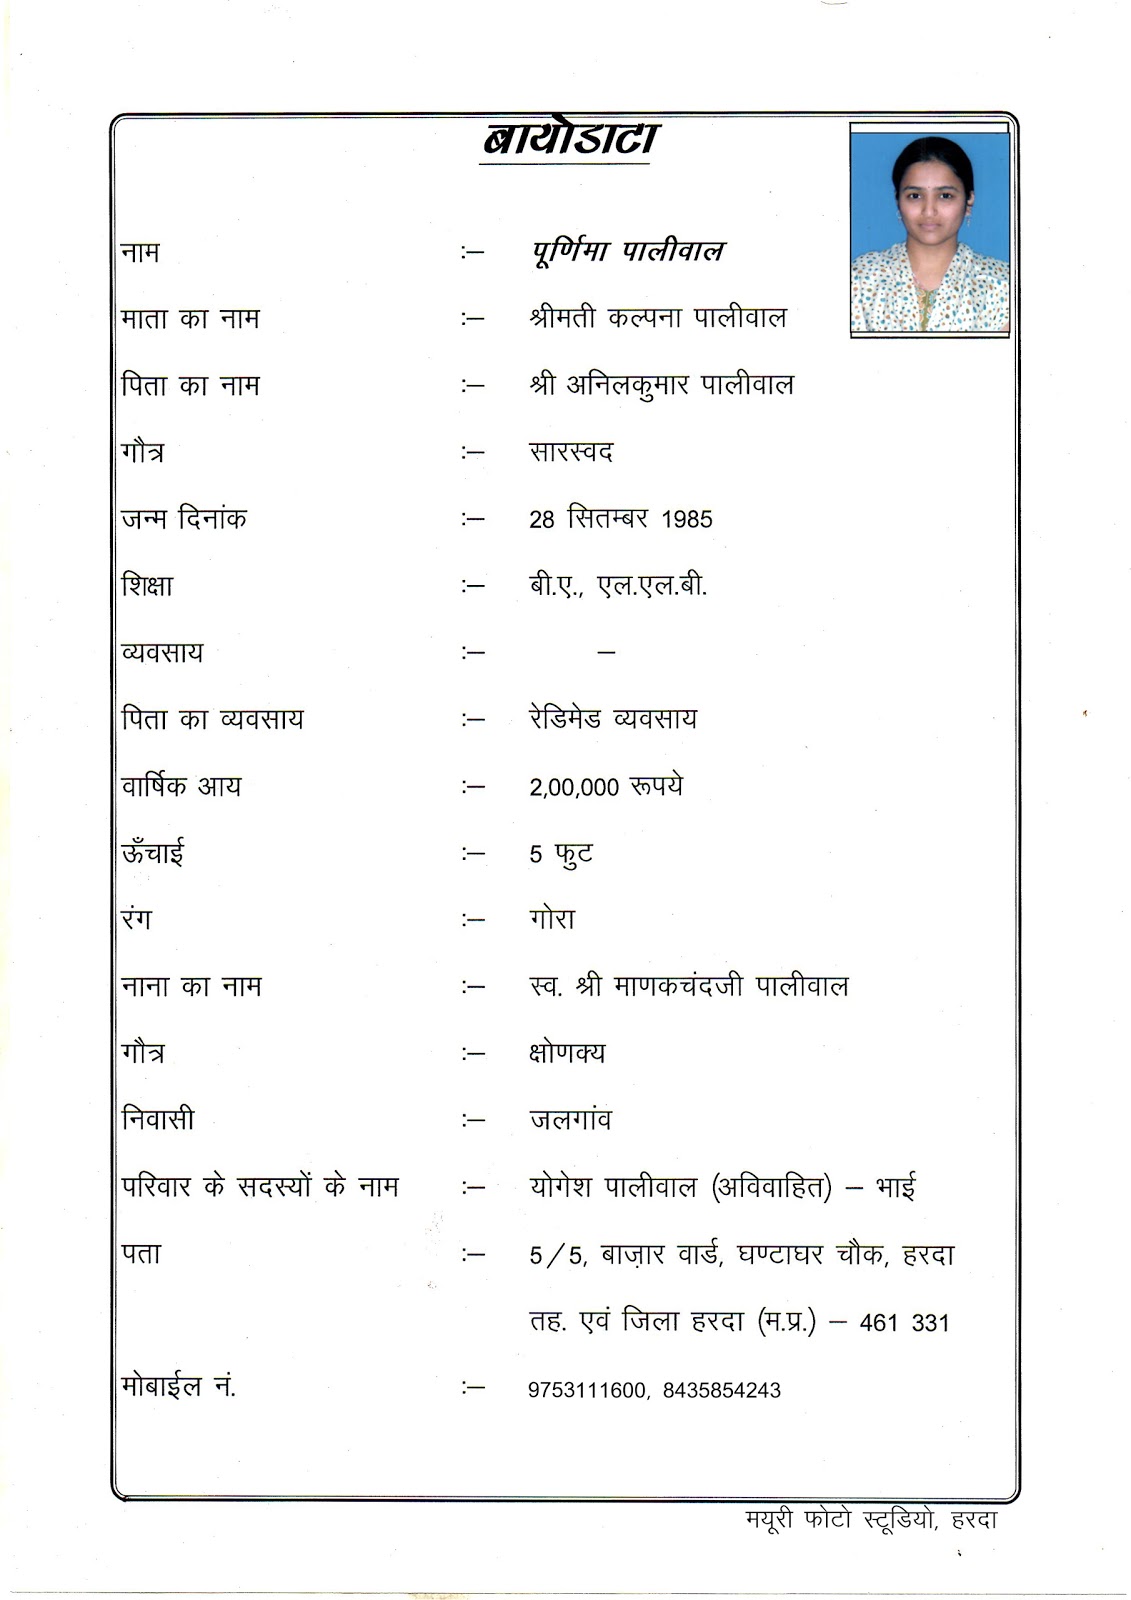 Marathi Biodata Format For Marriage - Secrets-and-lies 